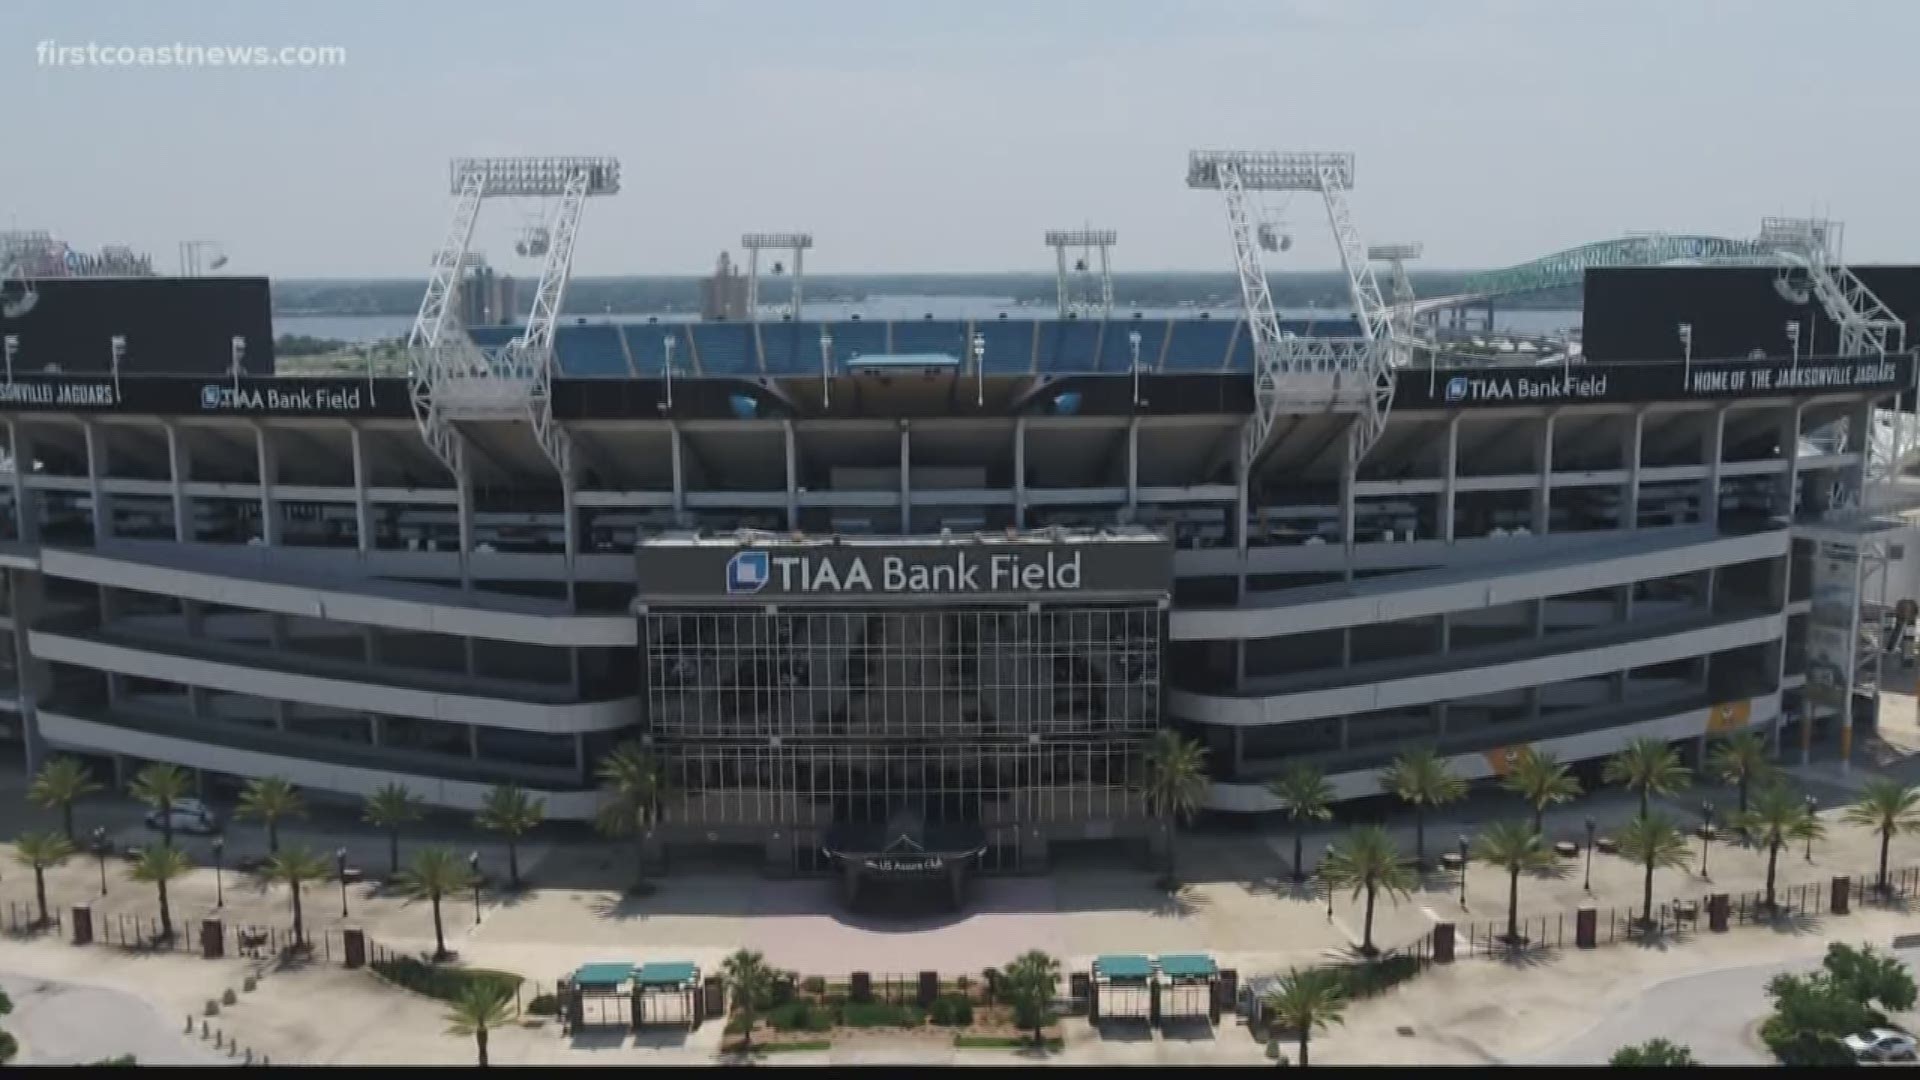 TIAA Bank Field is contracted to the be the Jaguars' stadium through 2030, but fans may have to prepare for a serious change.